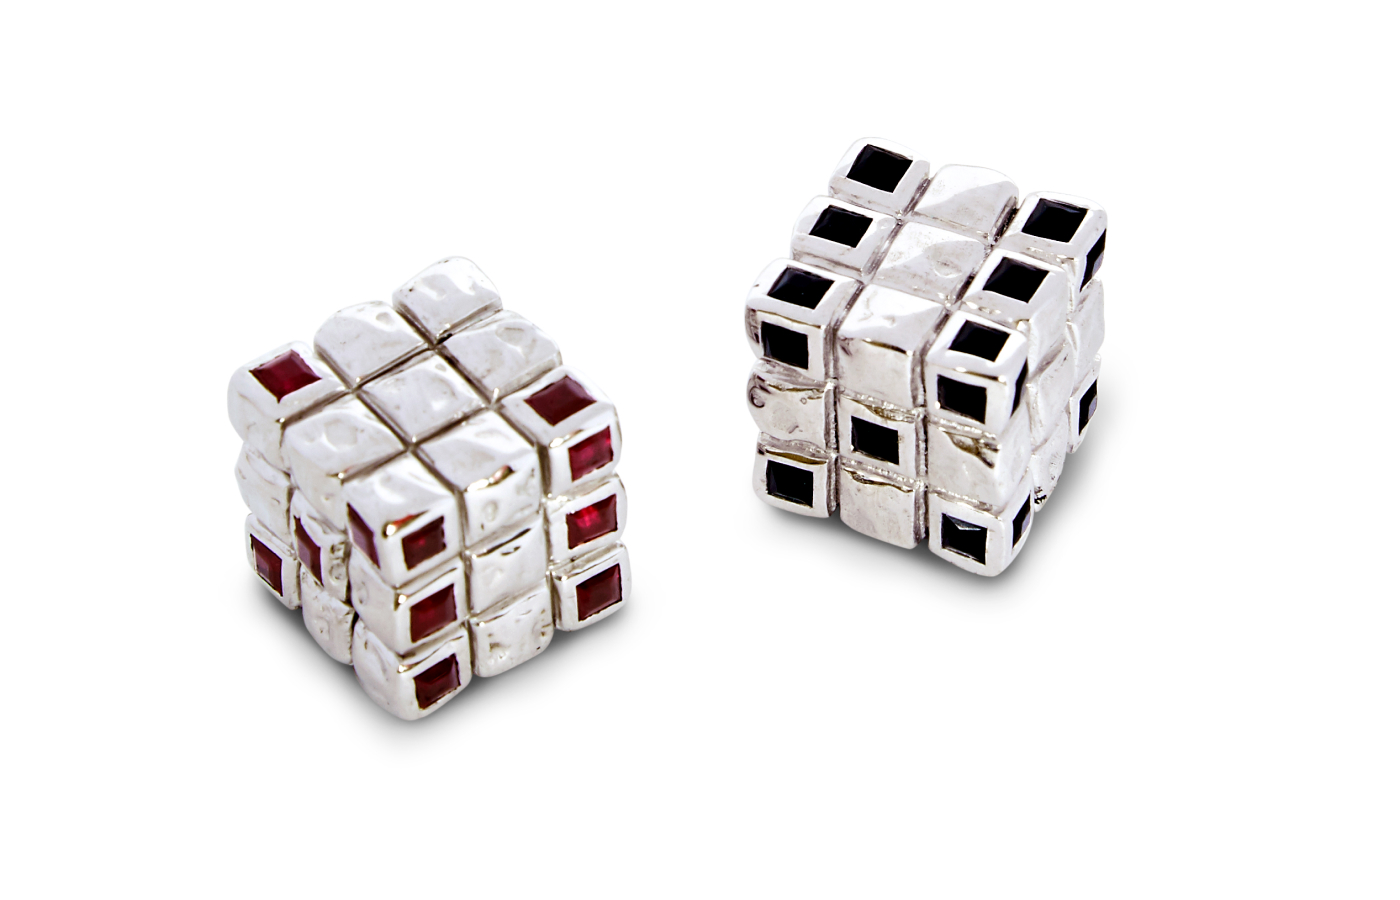 Patcharavipa Grid Dice in Siam gold vermeil, features 3.4-cts of ruby and 1.87-cts of onyx